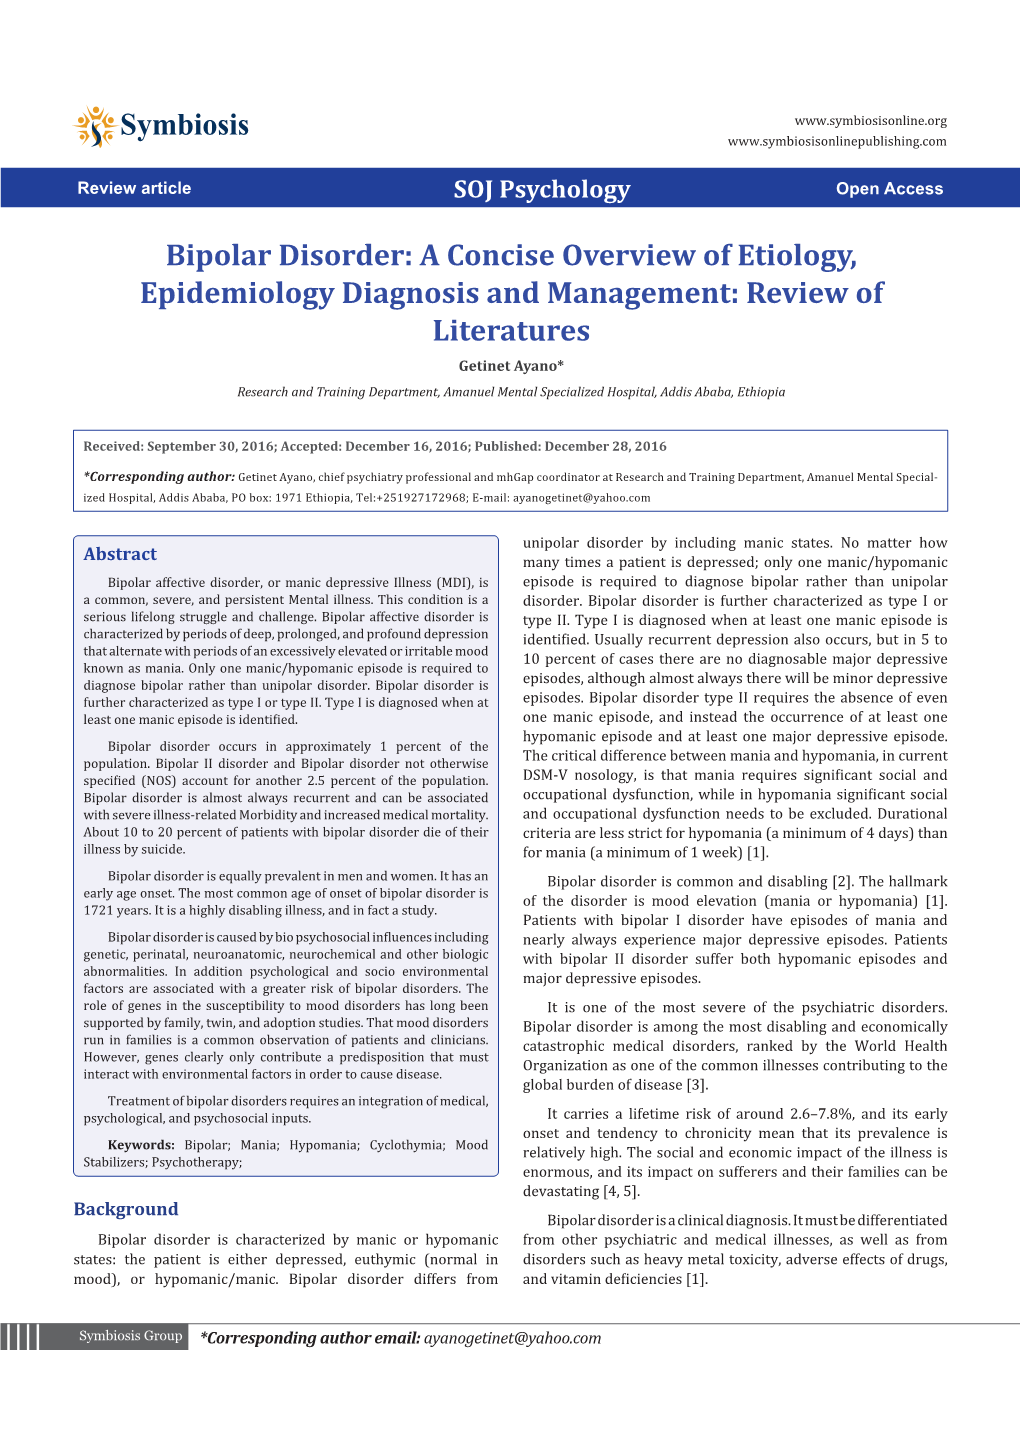 Bipolar Disorder: a Concise Overview of Etiology, Epidemiology